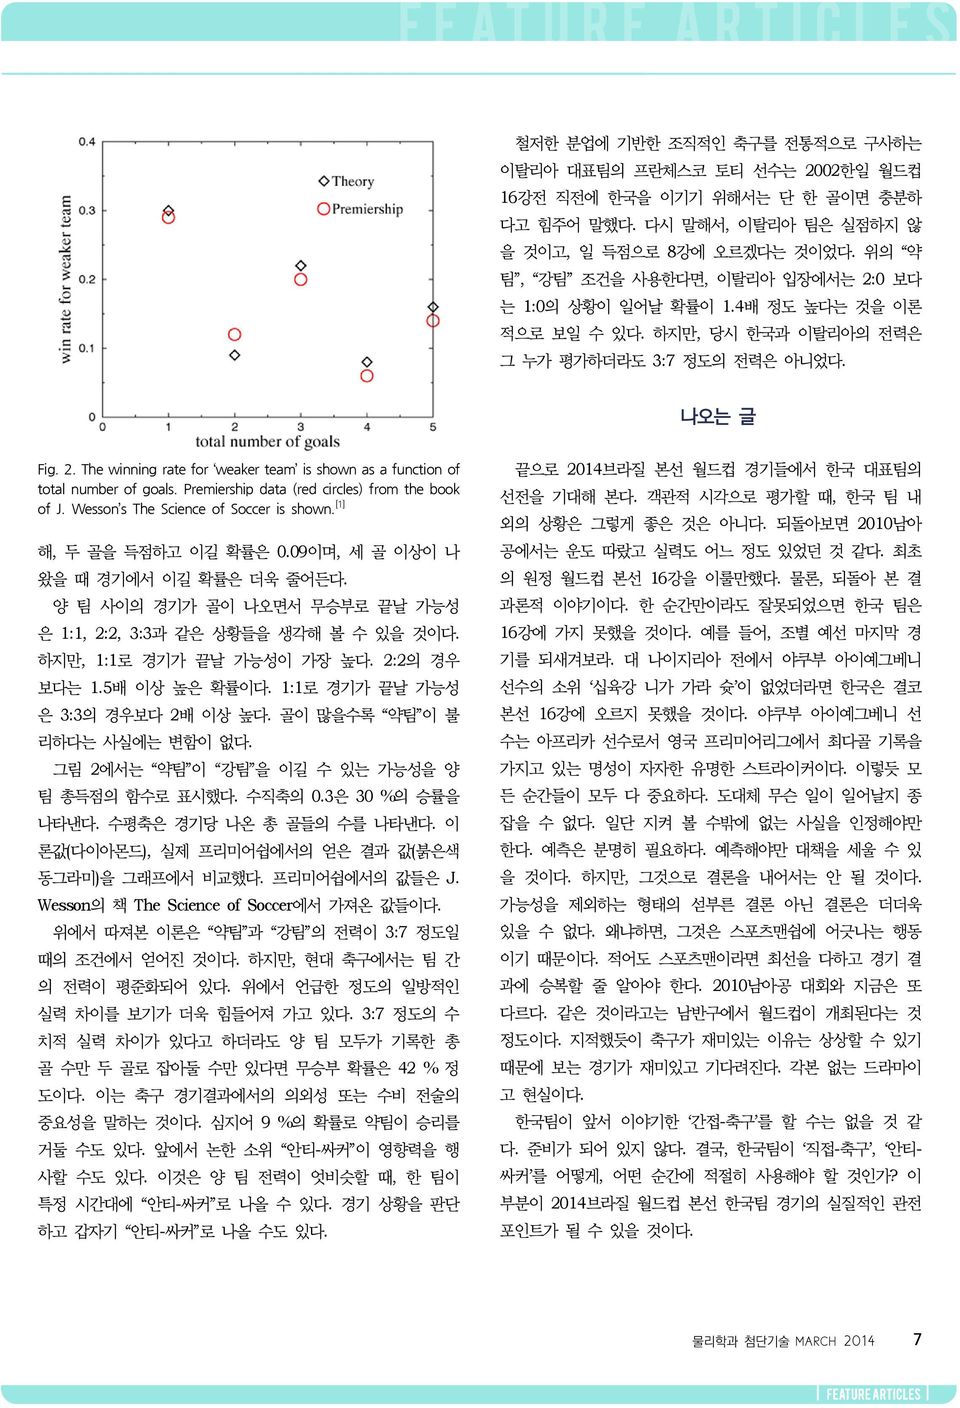 Premiership data (red circles) from the book of J. Wesson s The Science of Soccer is shown. [1] 해, 두 골을 득점하고 이길 확률은 0.09이며, 세 골 이상이 나 왔을 때 경기에서 이길 확률은 더욱 줄어든다.